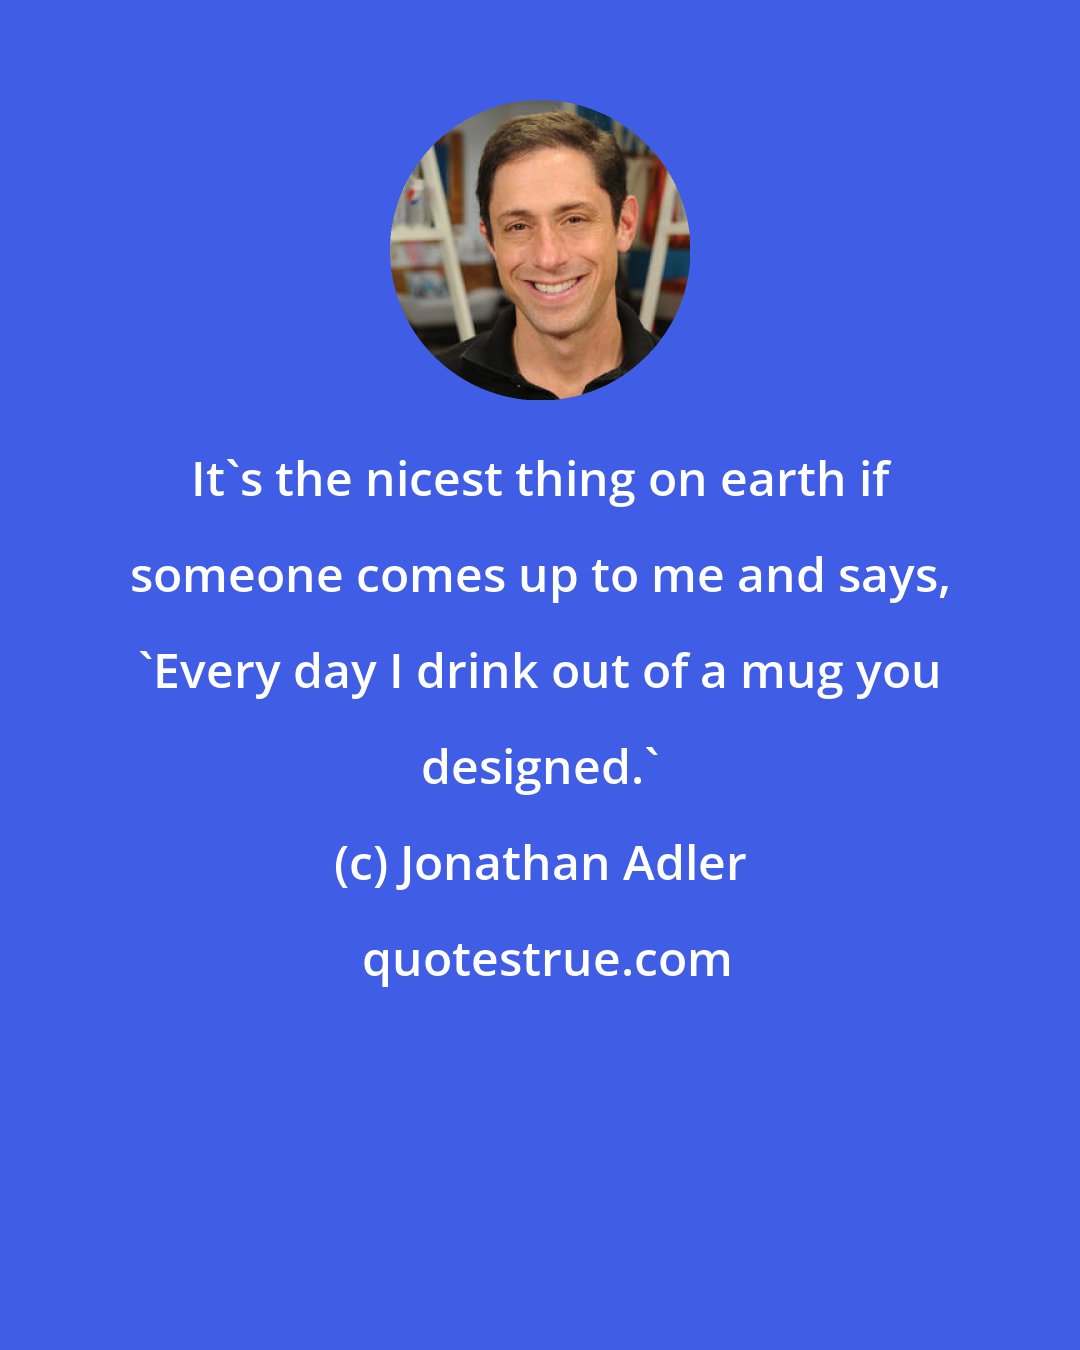 Jonathan Adler: It's the nicest thing on earth if someone comes up to me and says, 'Every day I drink out of a mug you designed.'